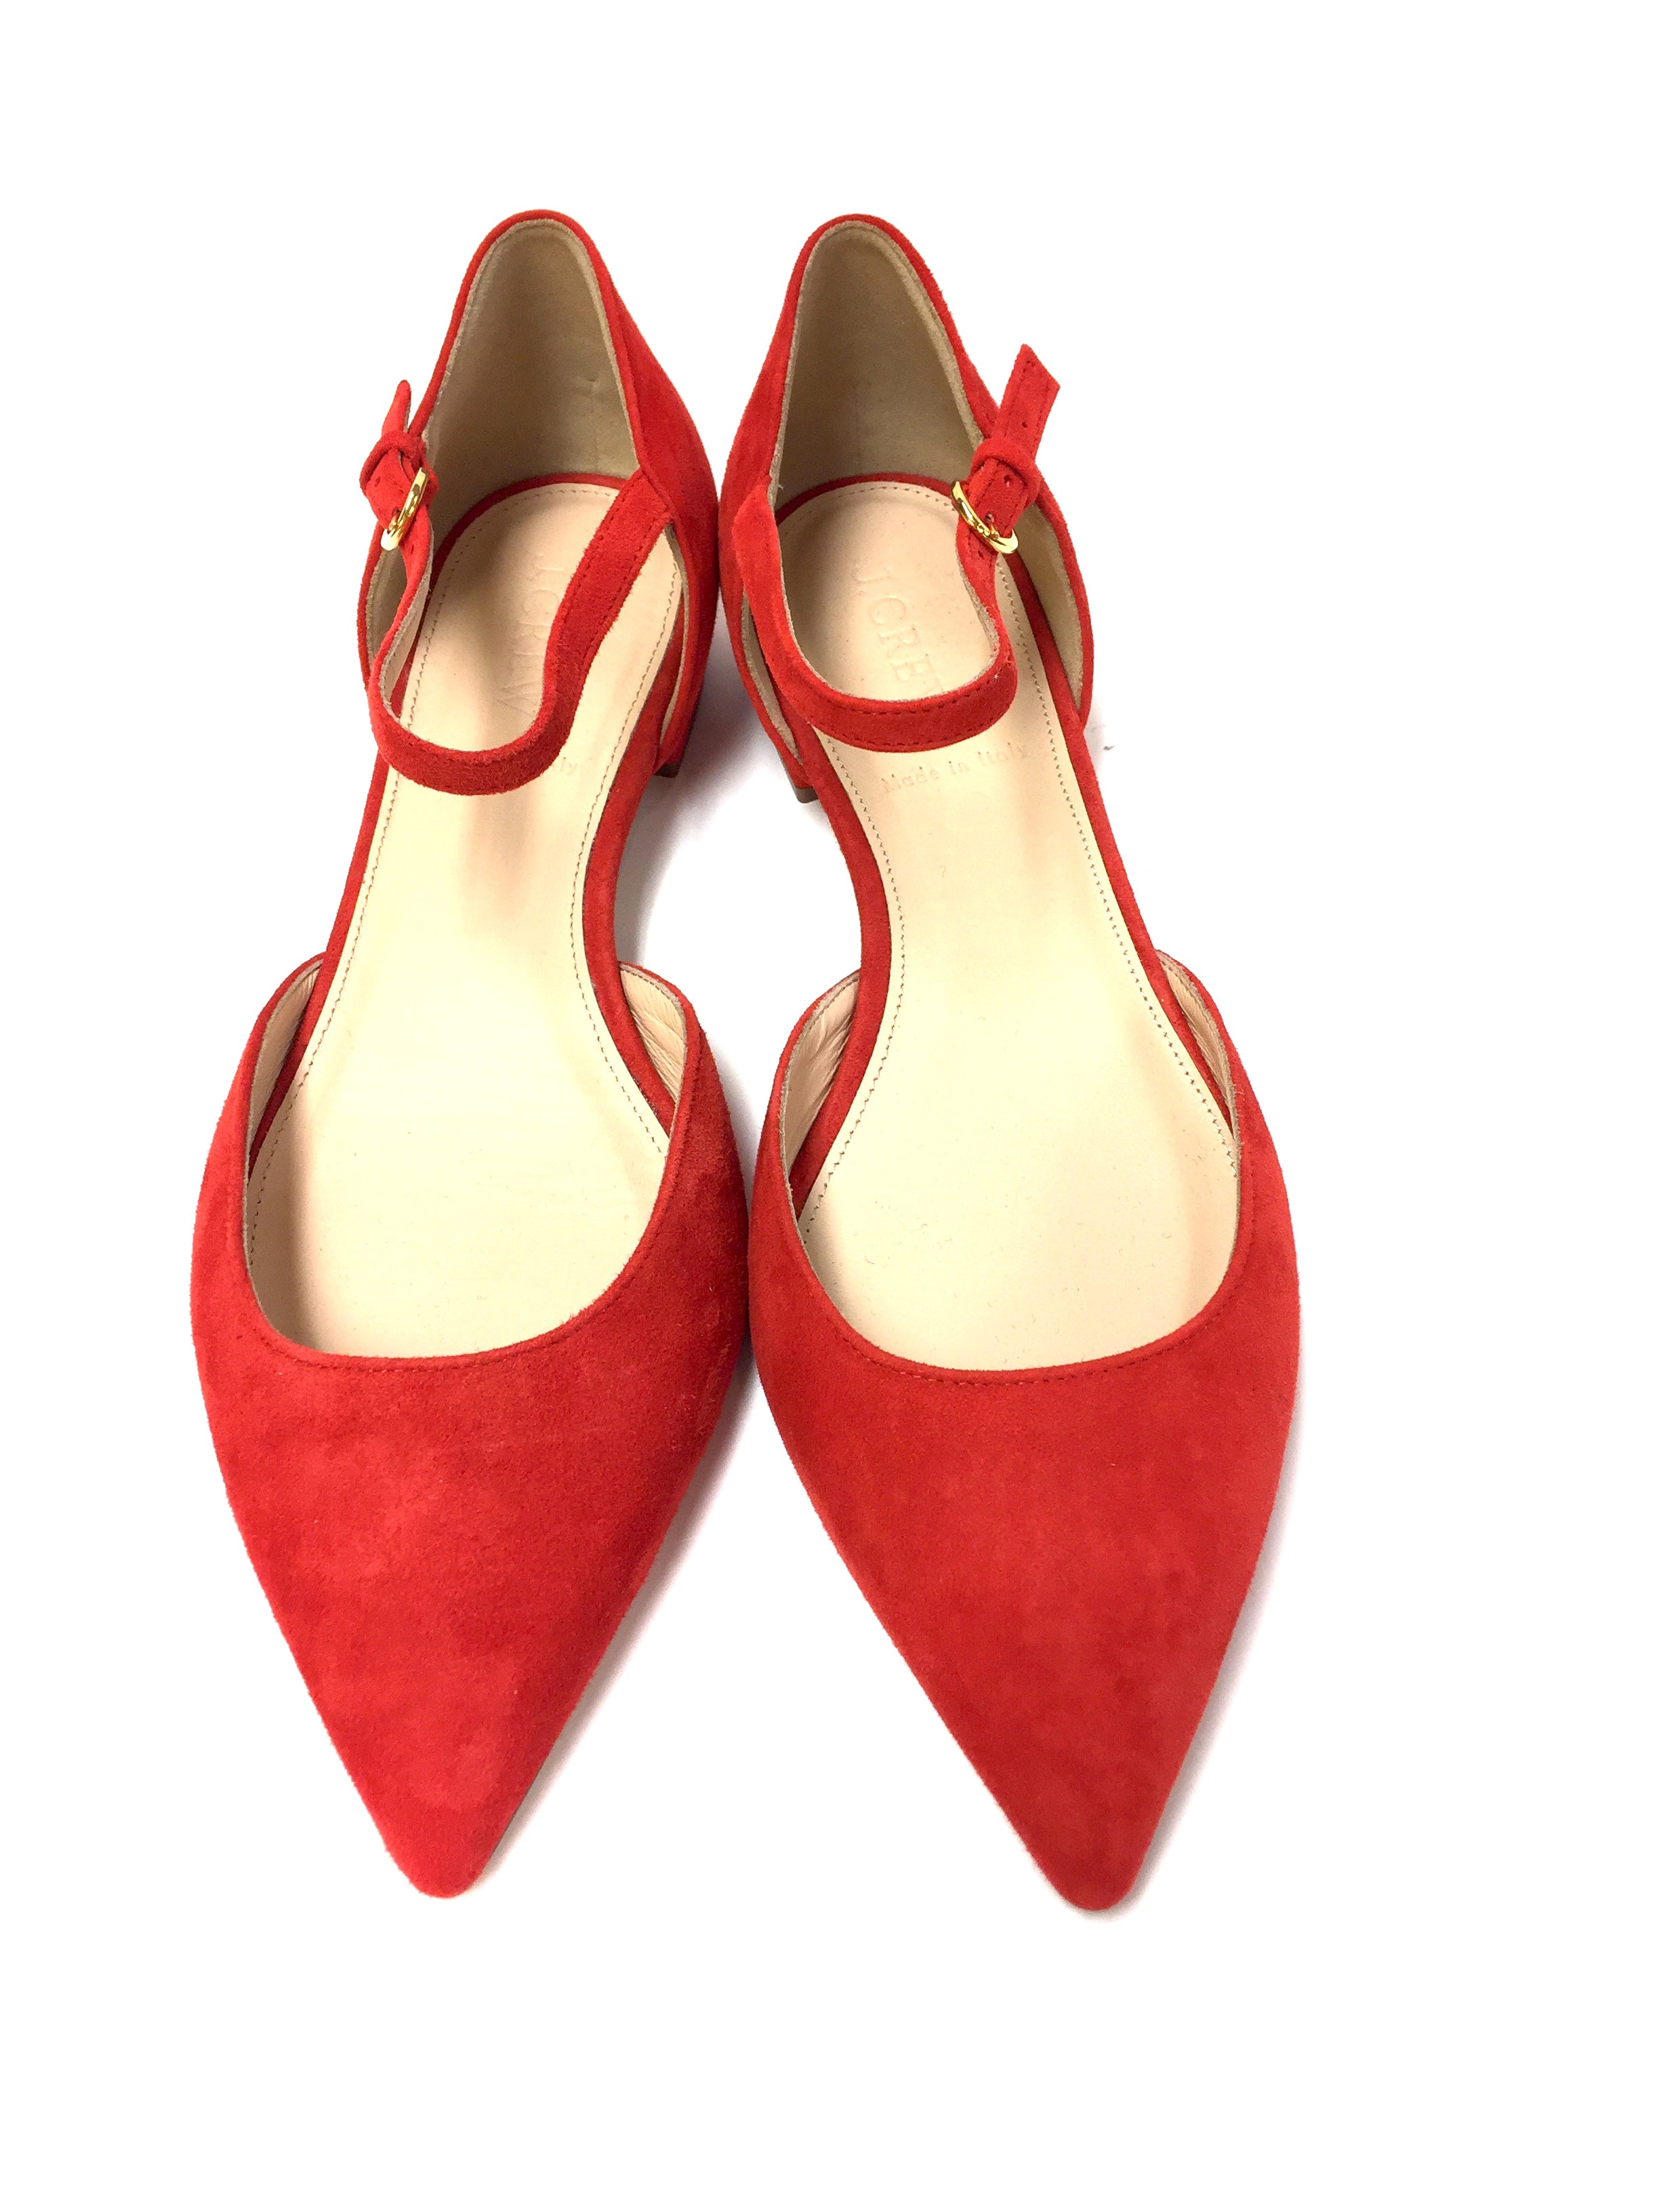 J. CREW Red Suede Ankle-Strap D'Orsay 